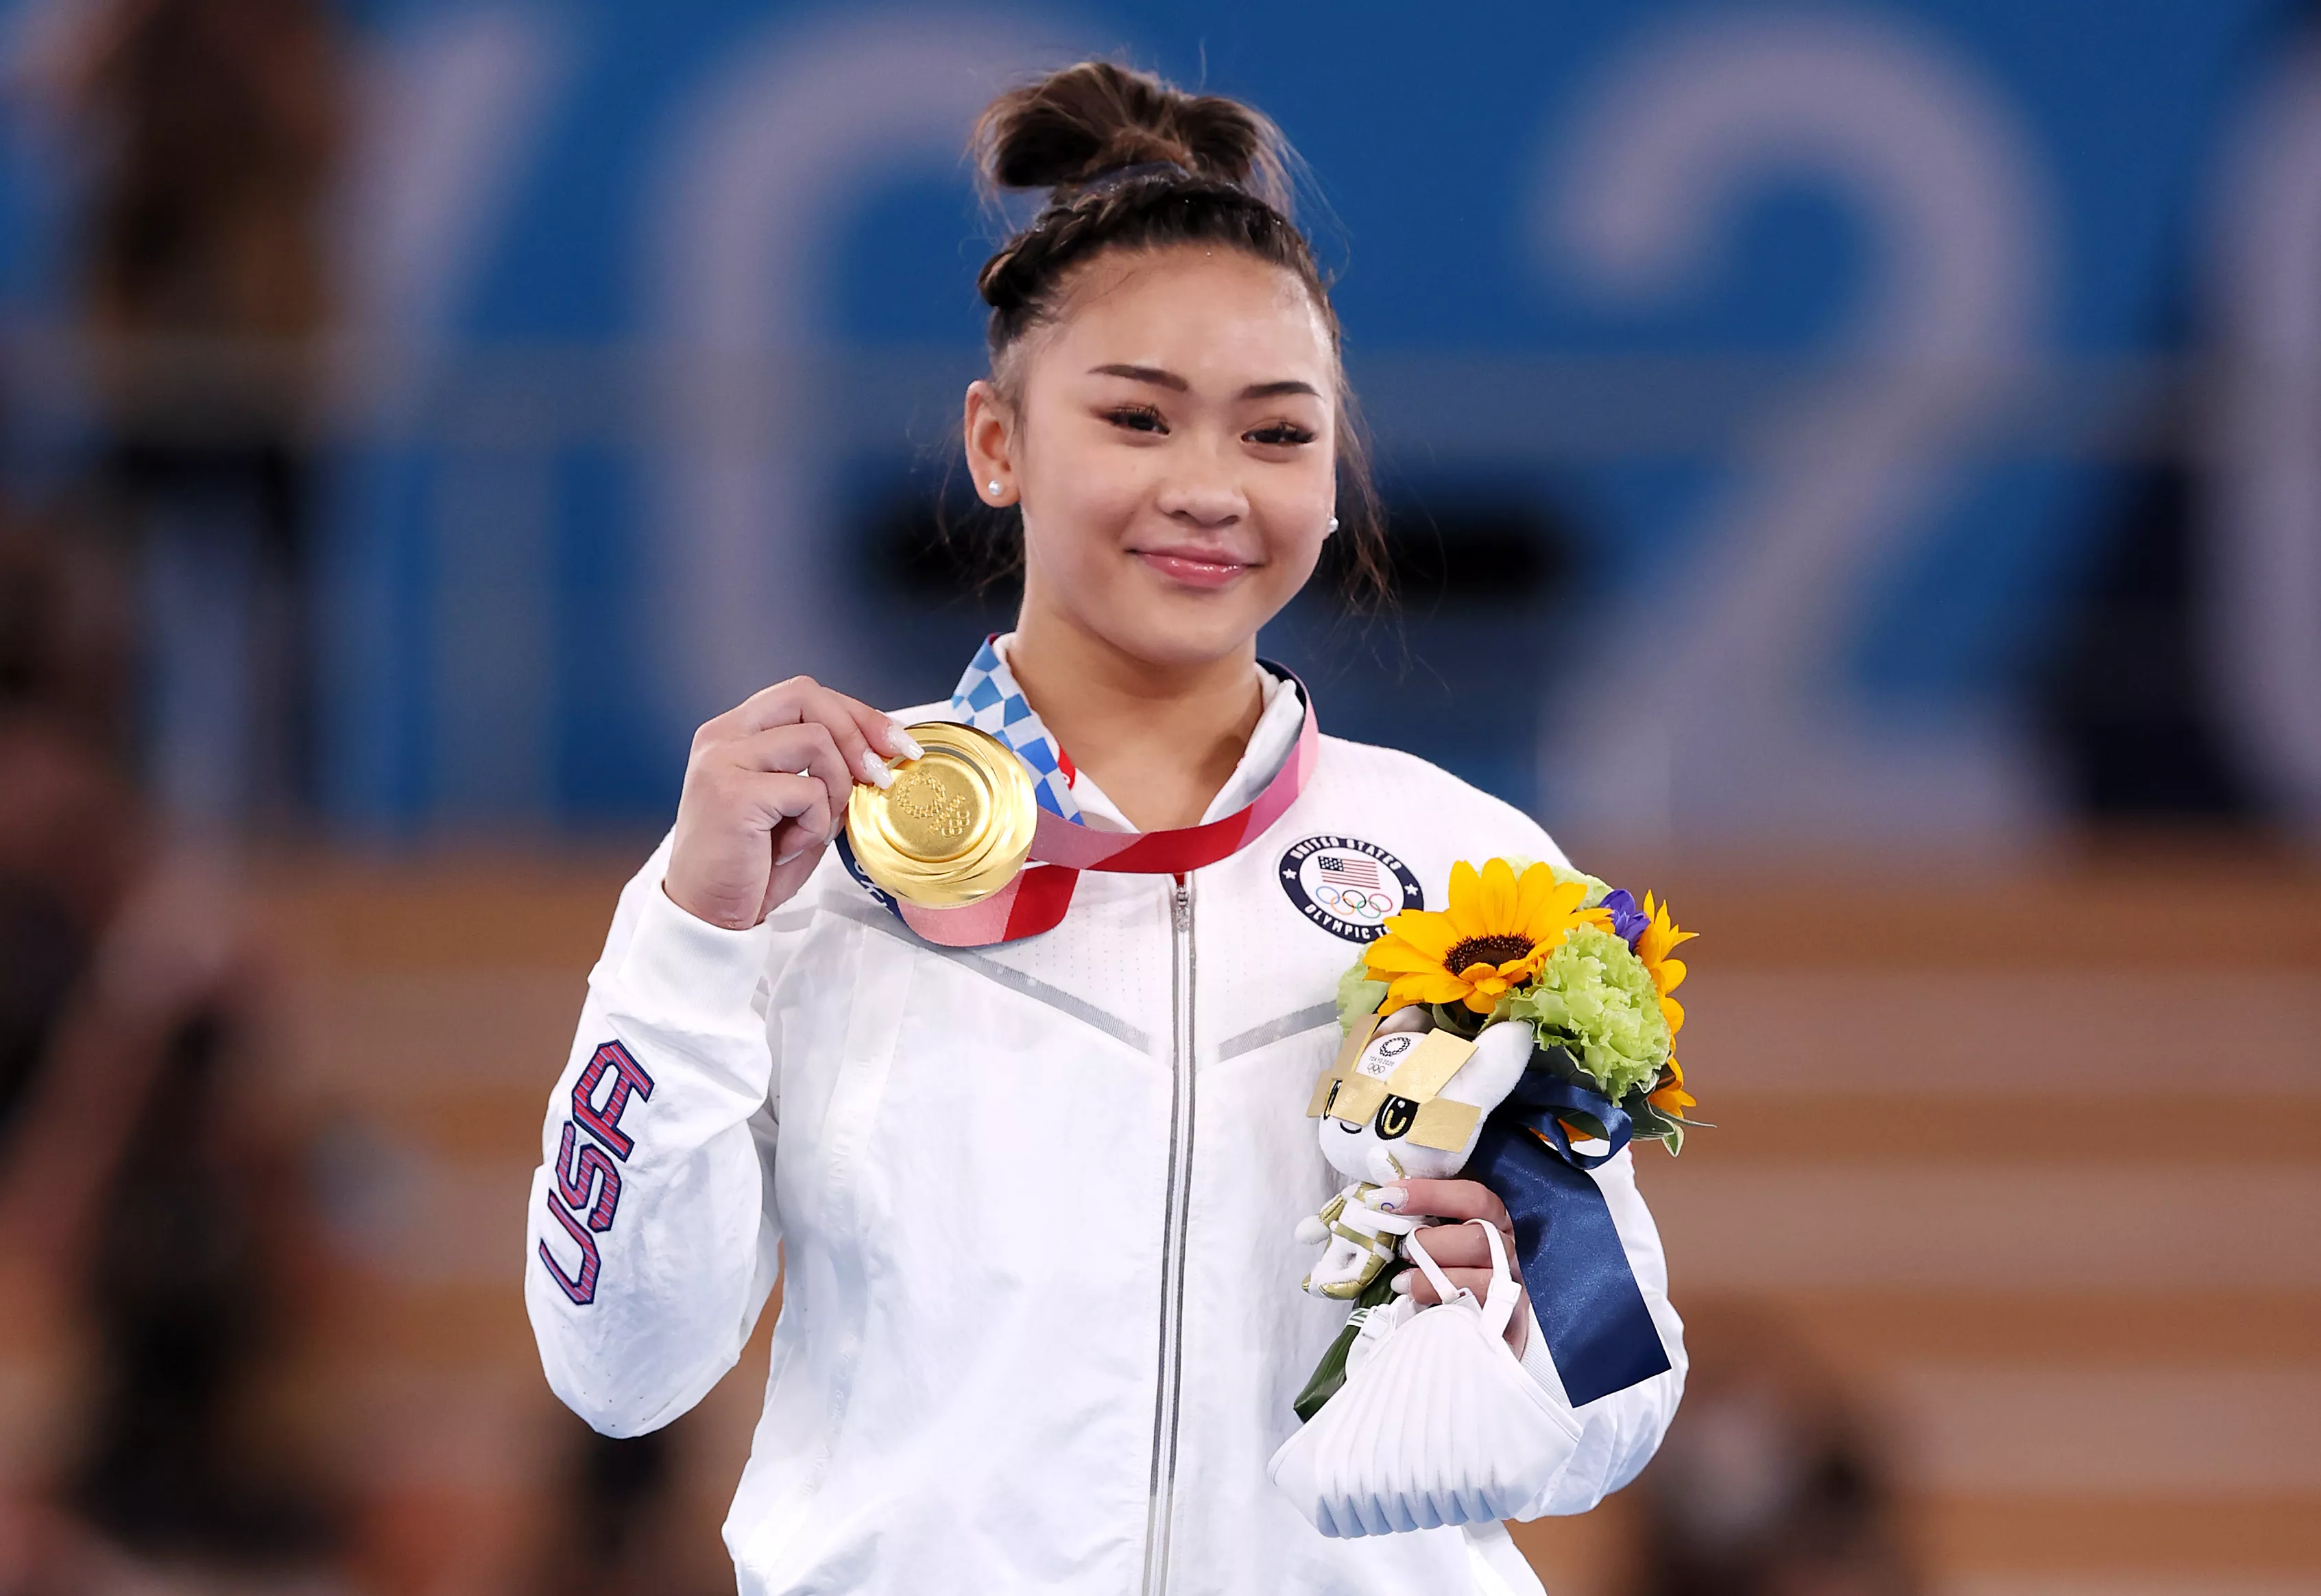 Gold medal Photos, Images for Download Free - photoAC